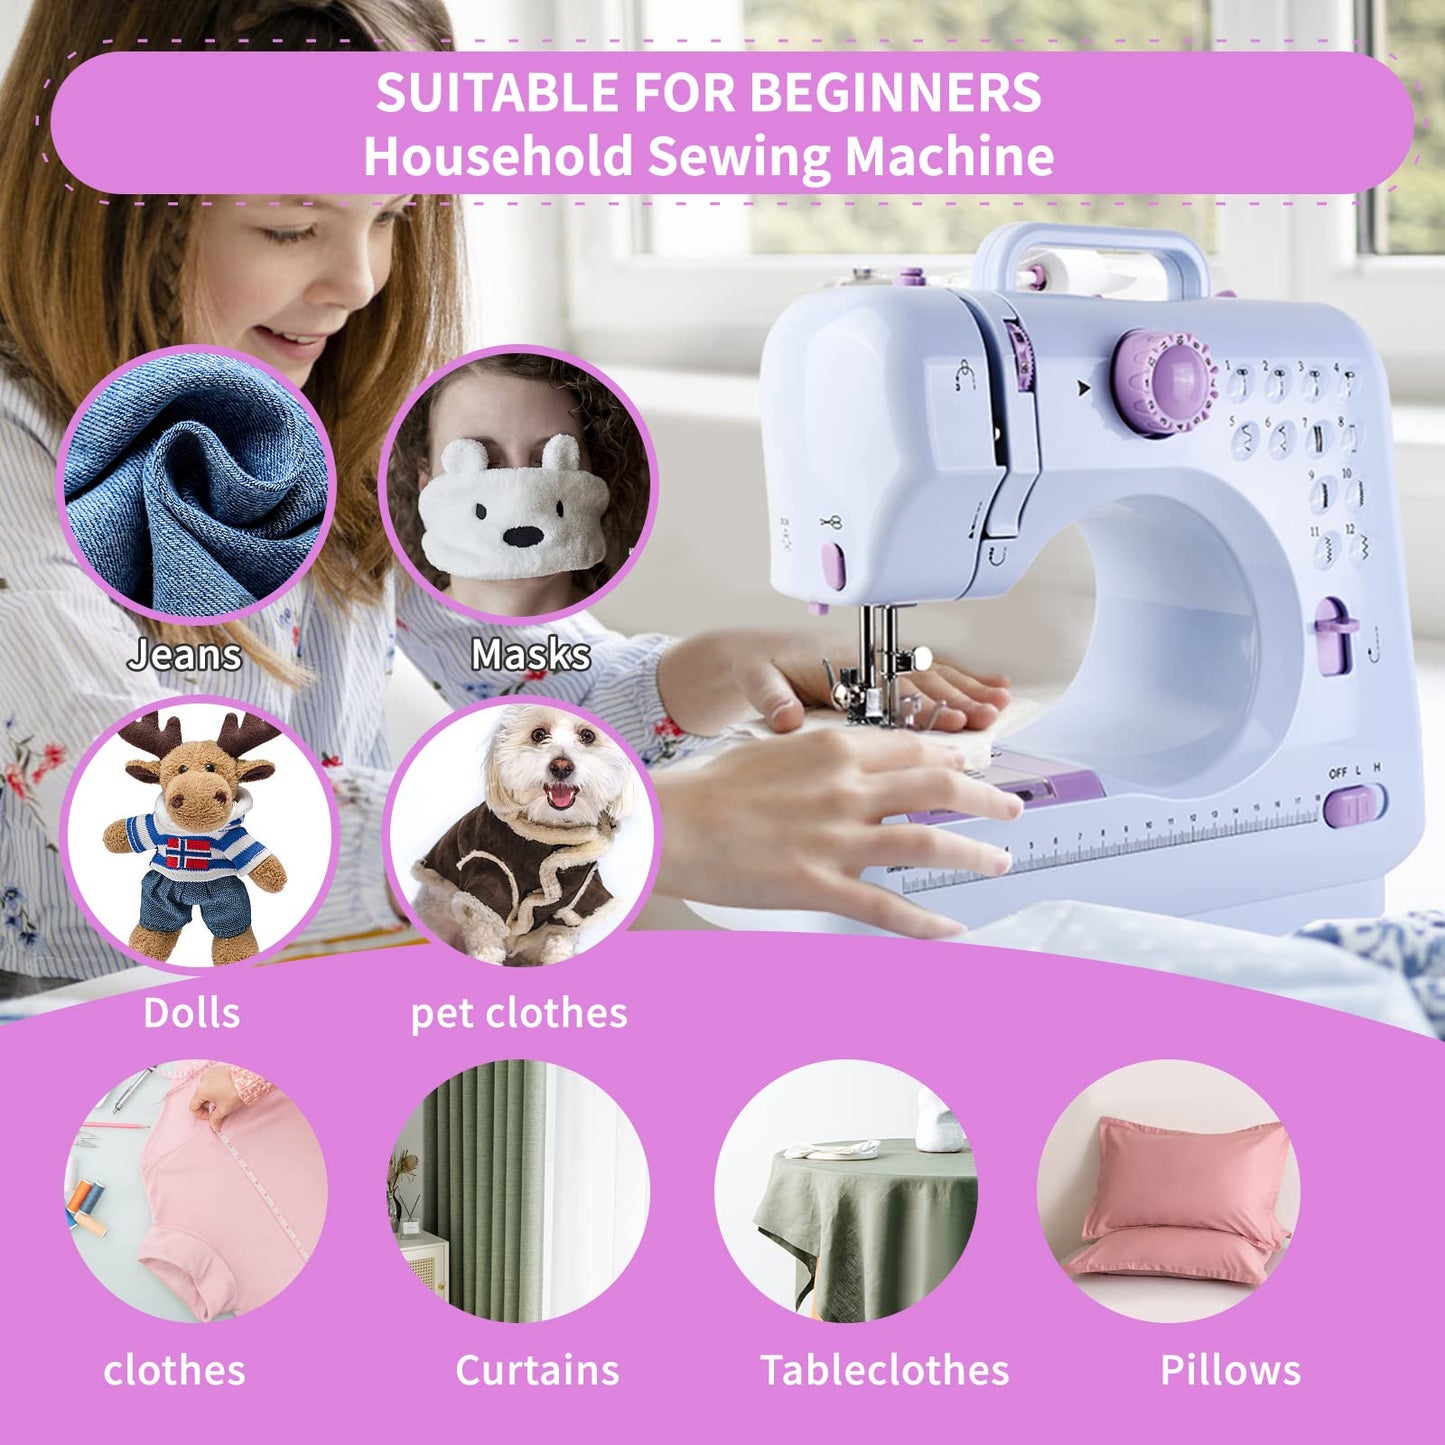 HJWTCQL Mini Sewing Machine for Beginners,Kids Small Sewing Machines 12 Built-in Stitches with Reverse Sewing,Portable Sewing Machines with 27pc Accessory Kit Included 2 Speed Double Thread Foot Pedal